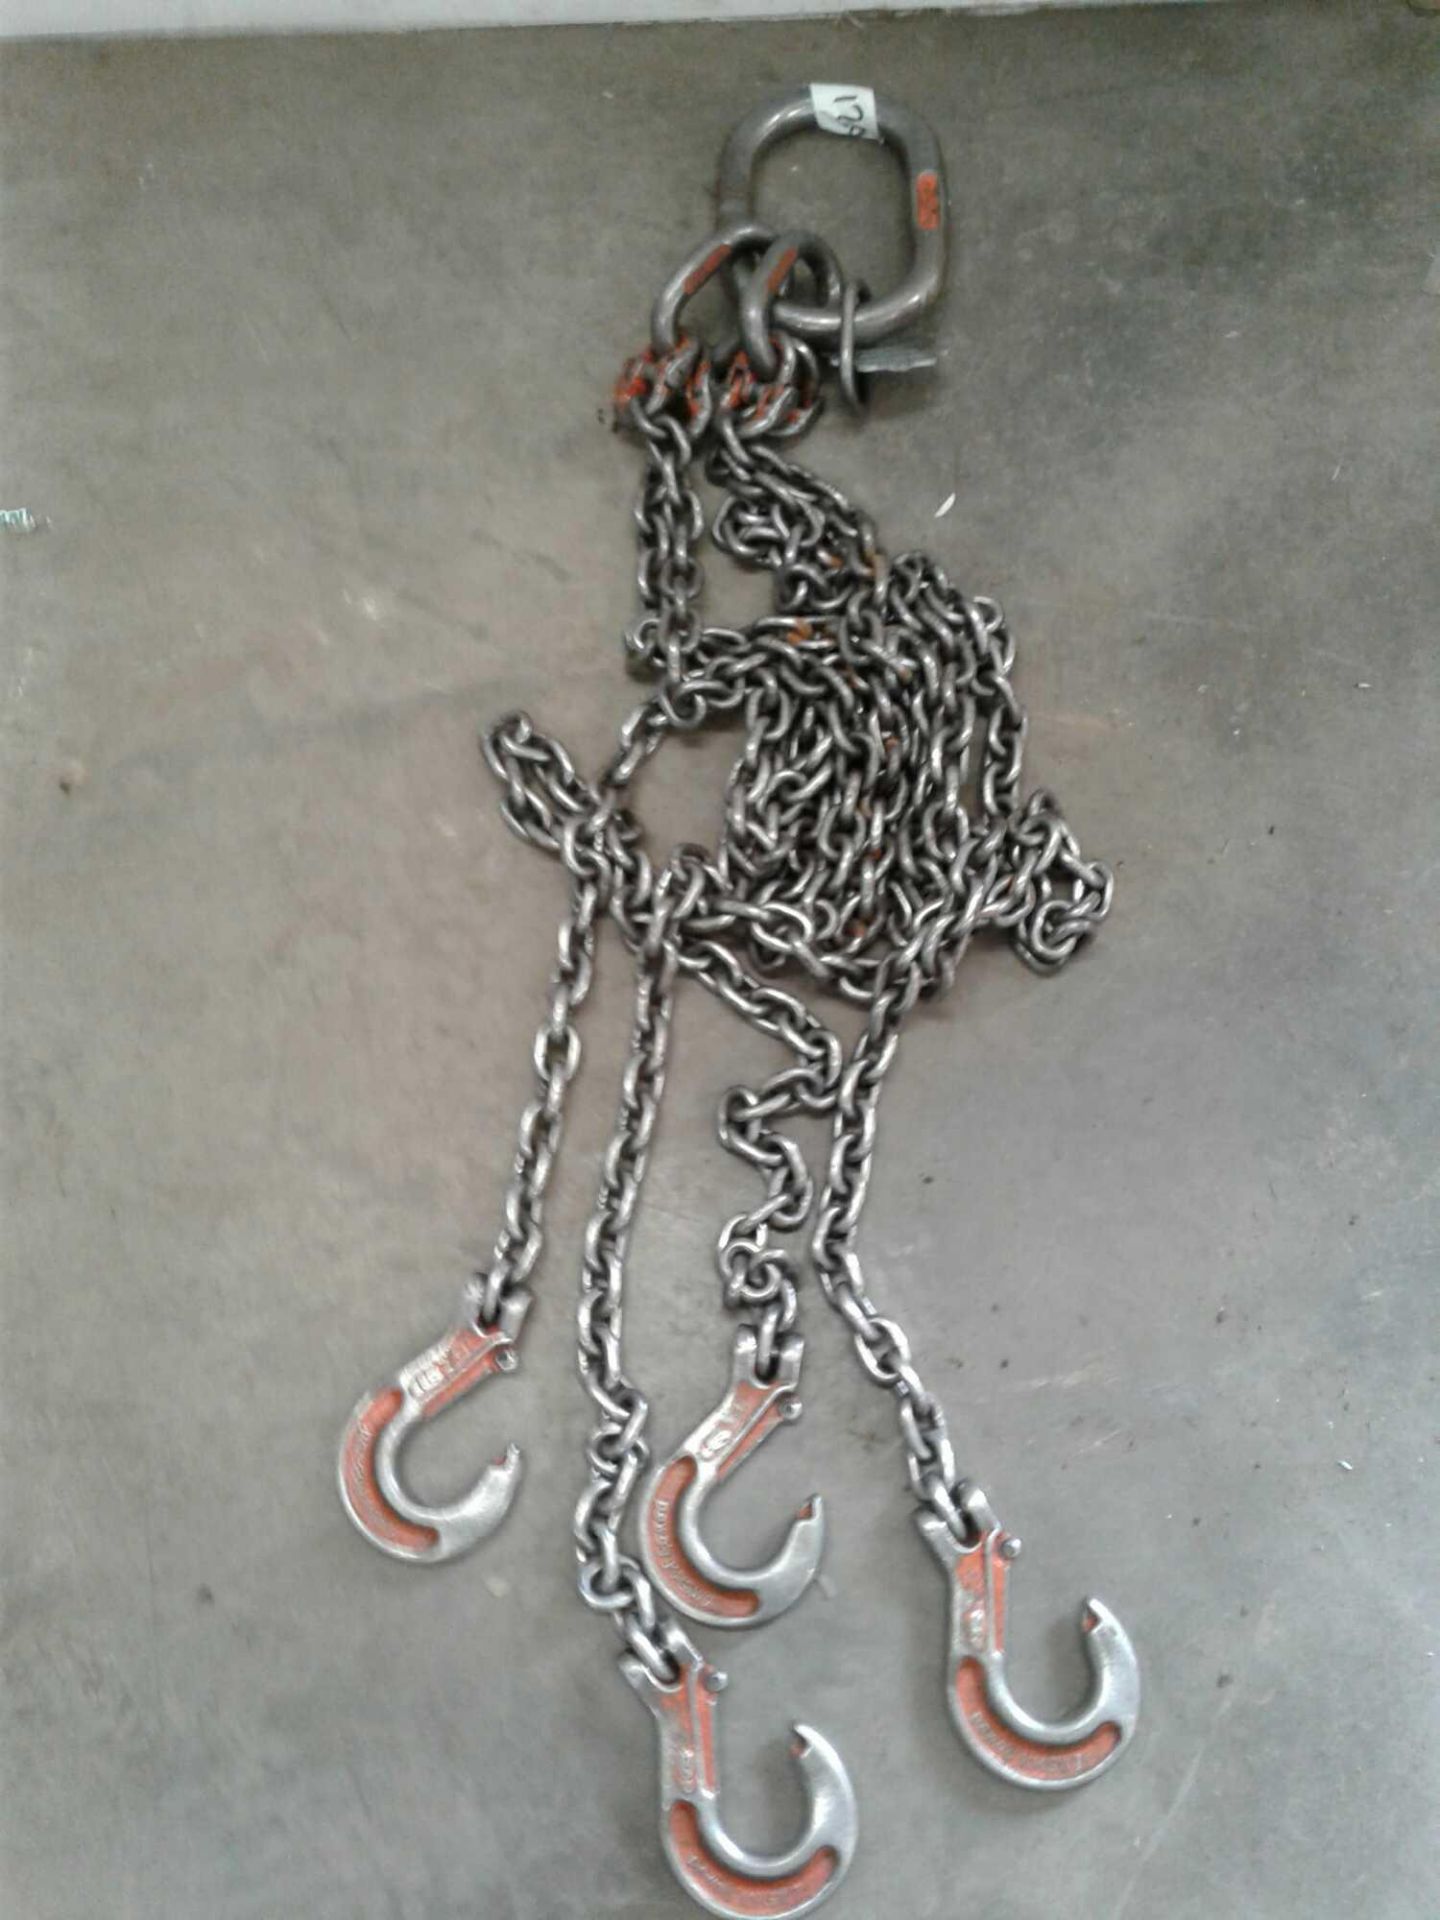 4 point lifting chain